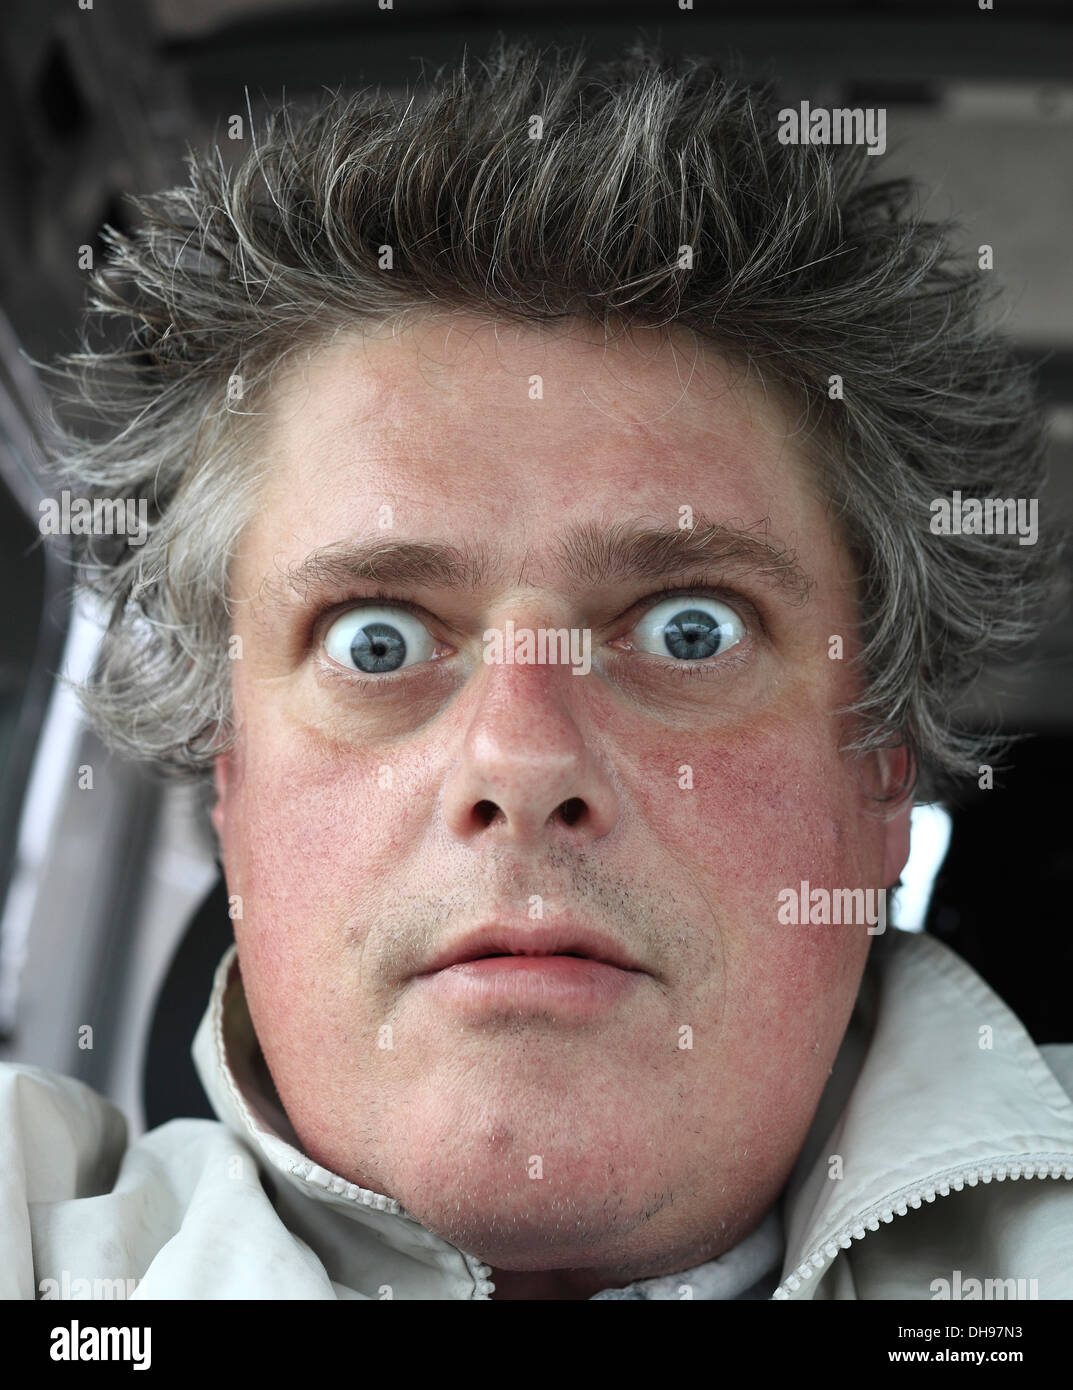 Wide eyed, odd expression on the face of a middle aged white male. Stock Photo